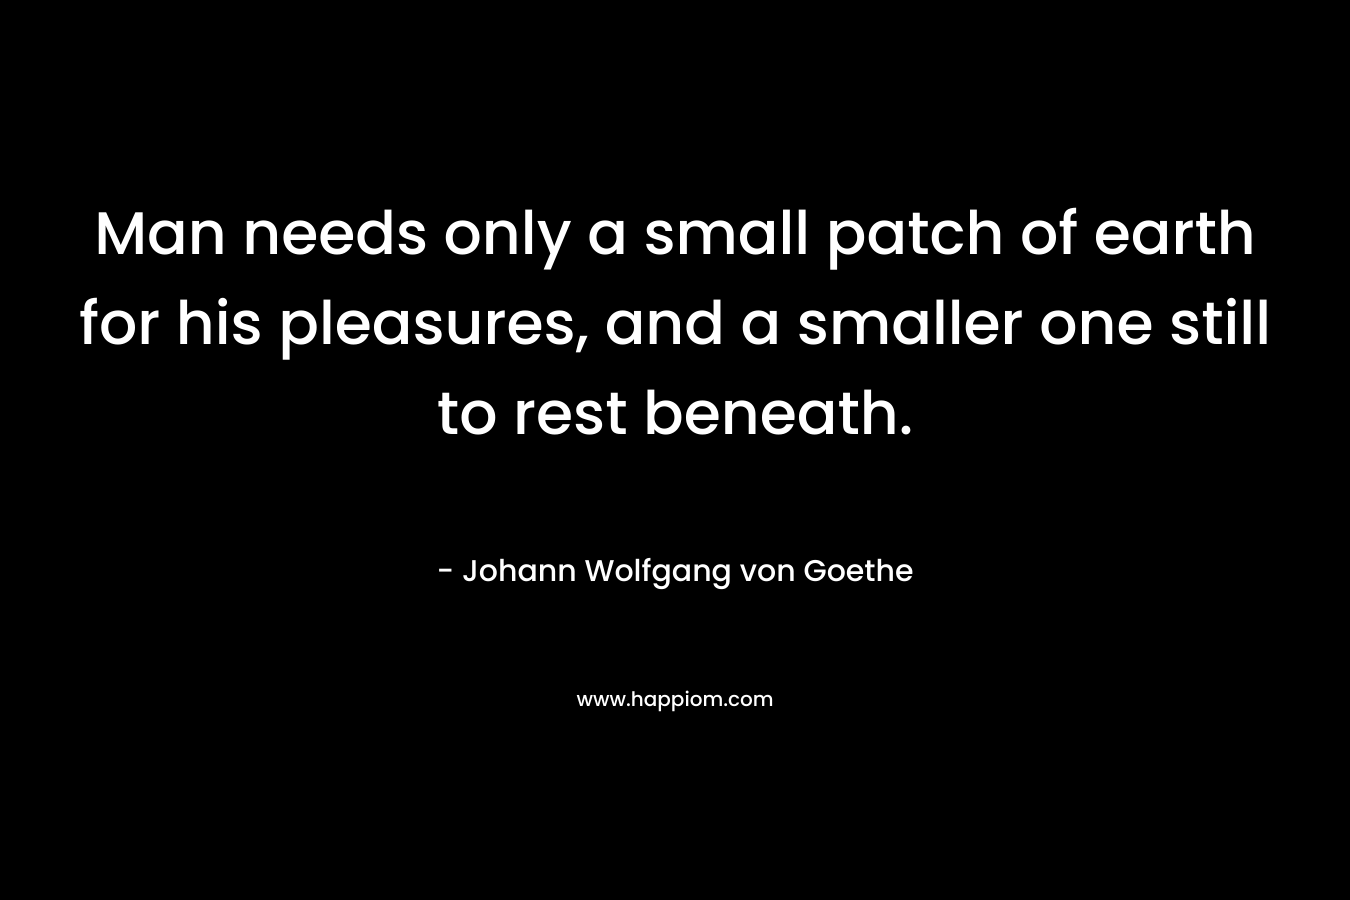 Man needs only a small patch of earth for his pleasures, and a smaller one still to rest beneath. – Johann Wolfgang von Goethe